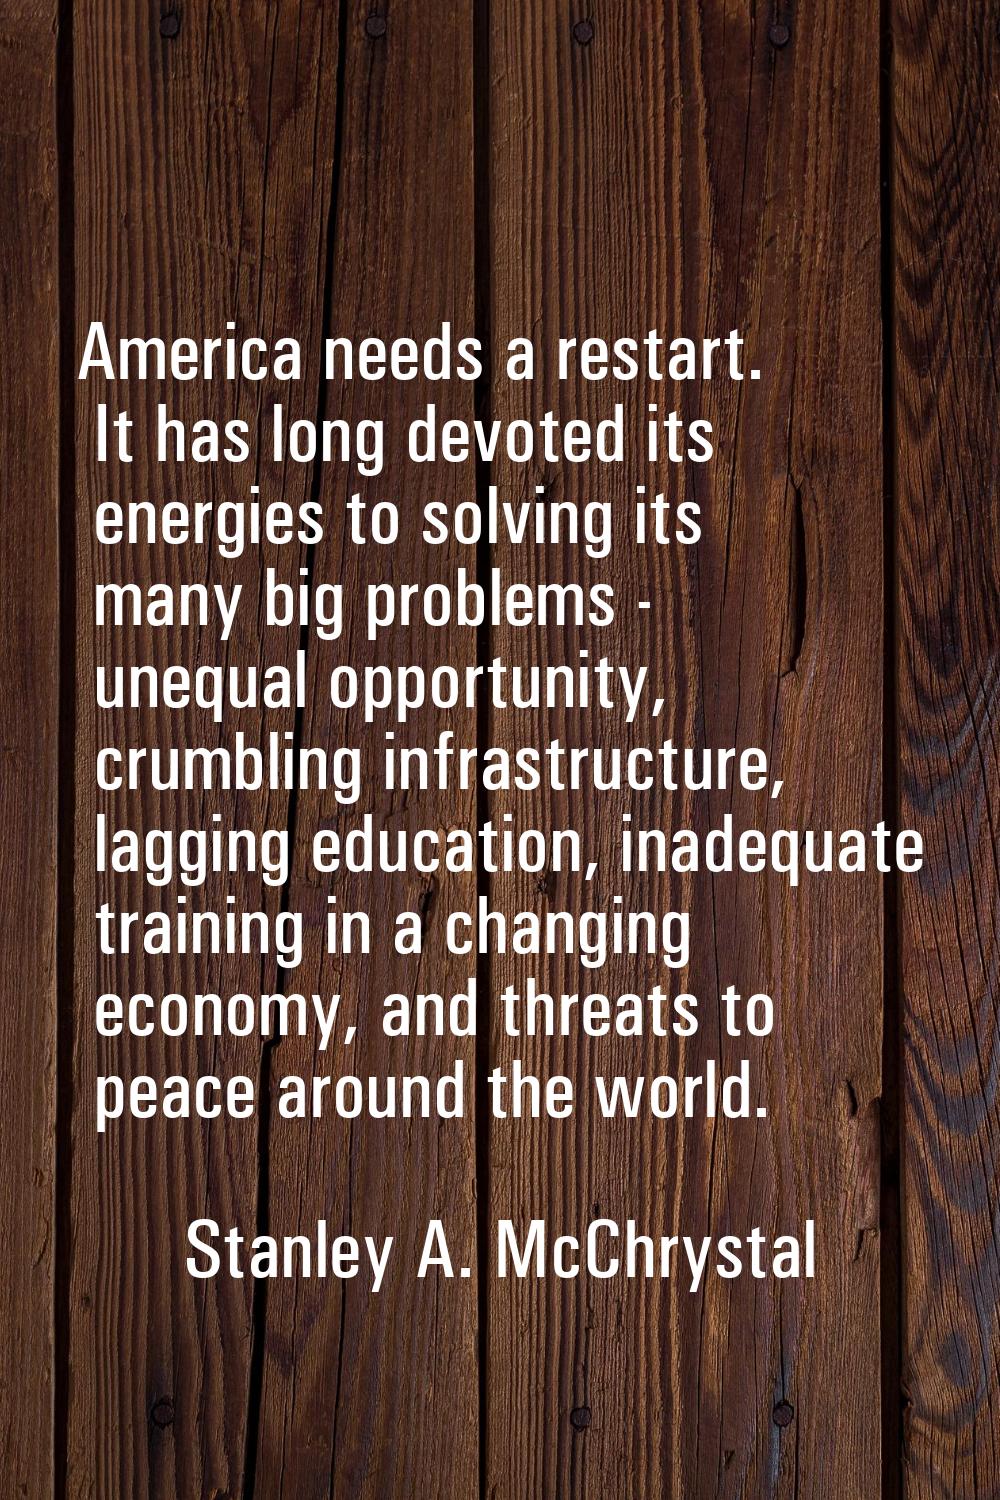 America needs a restart. It has long devoted its energies to solving its many big problems - unequa